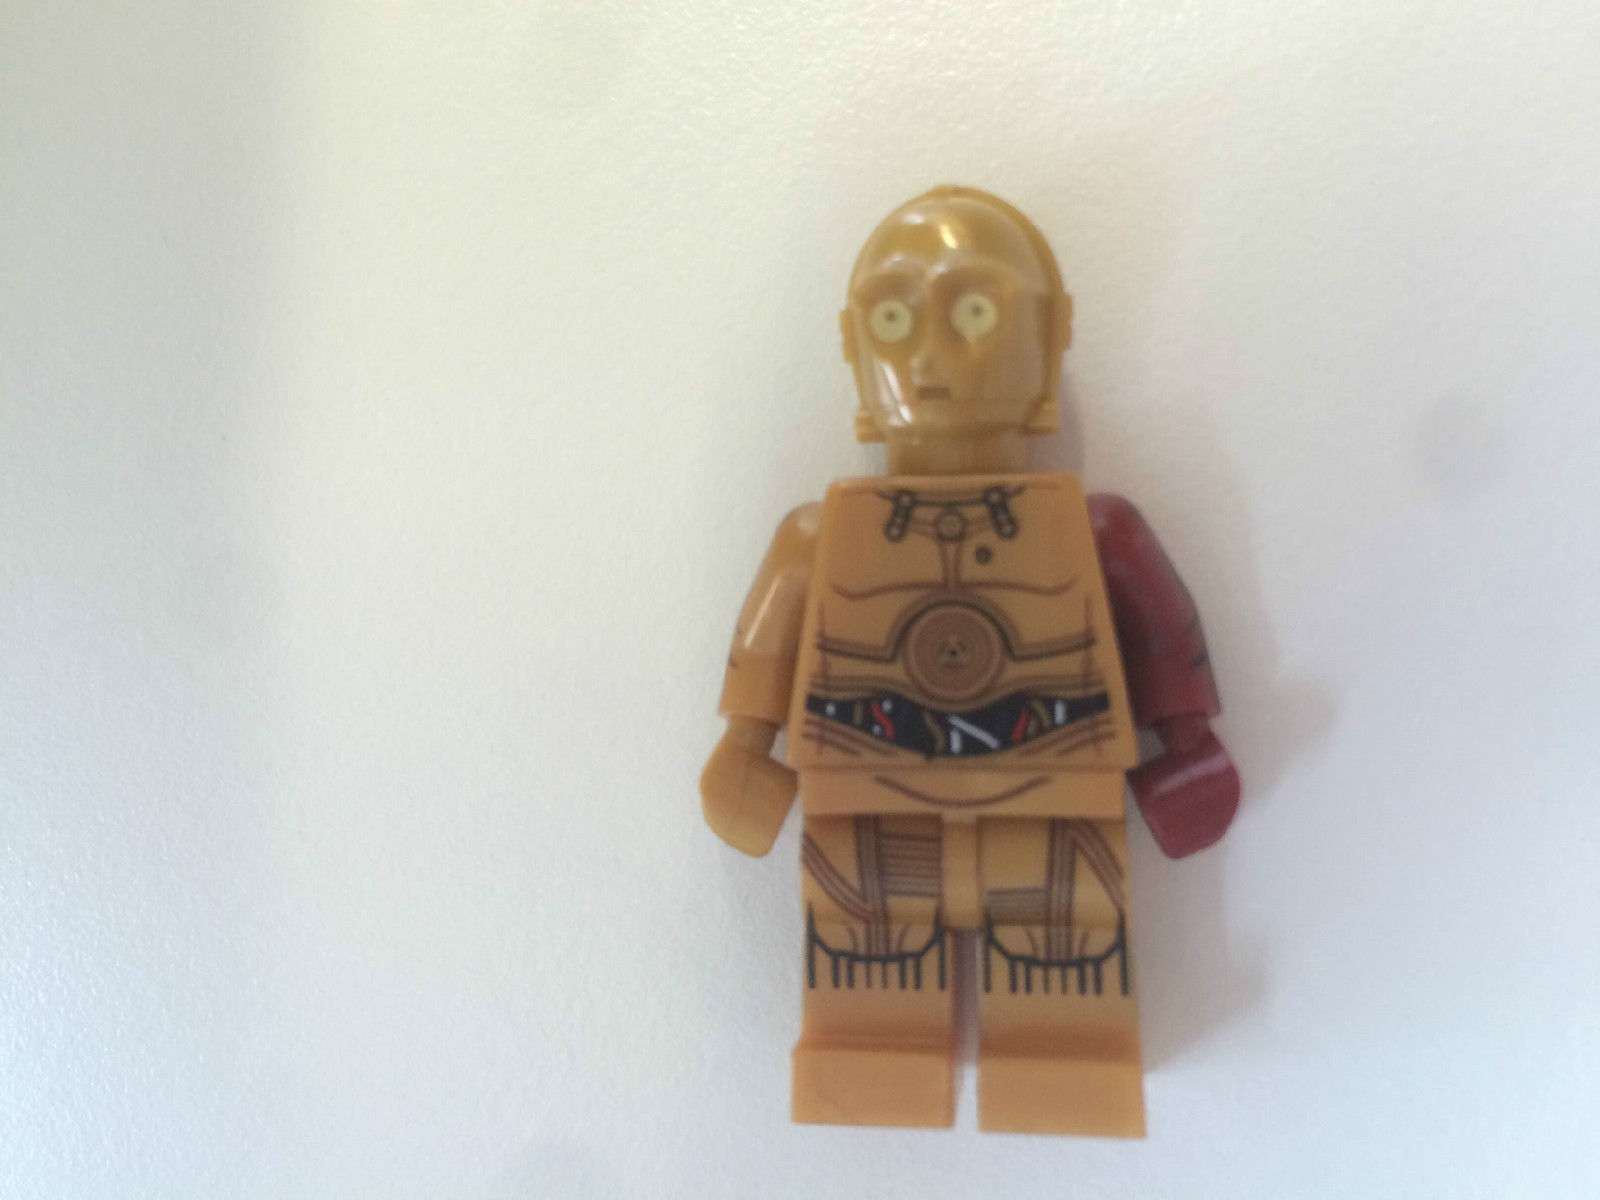 LEGO 5002948 Star Wars Figure The Force Awakens C-3PO Minifigure Polybag Red Arm 